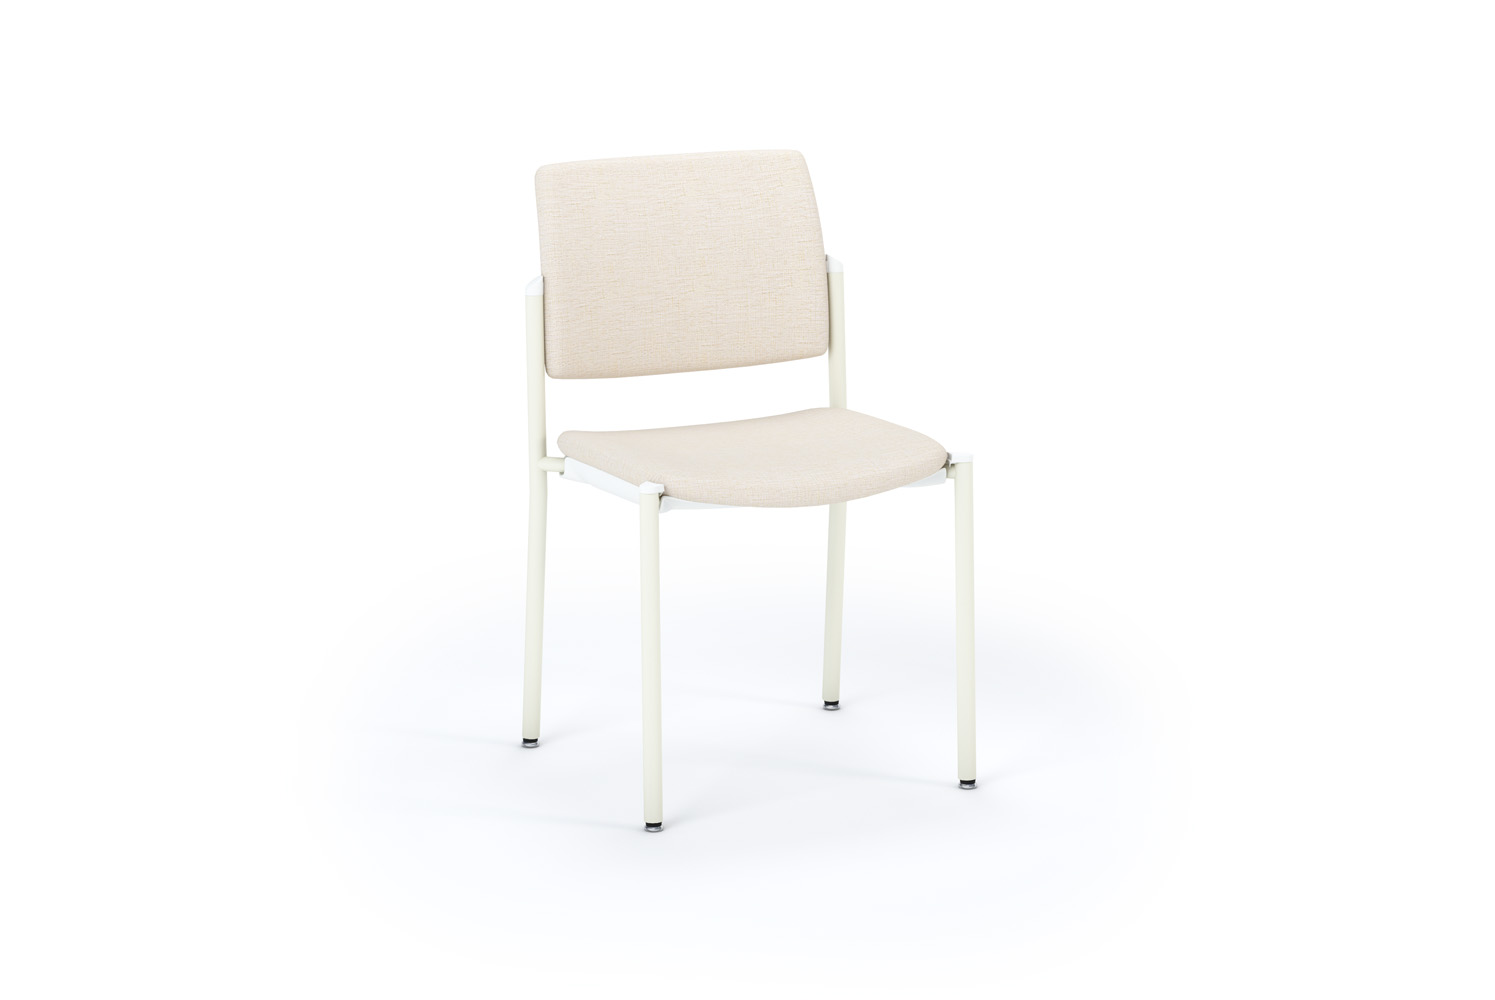 Bruno Upholstered Seat and back, Two fabric